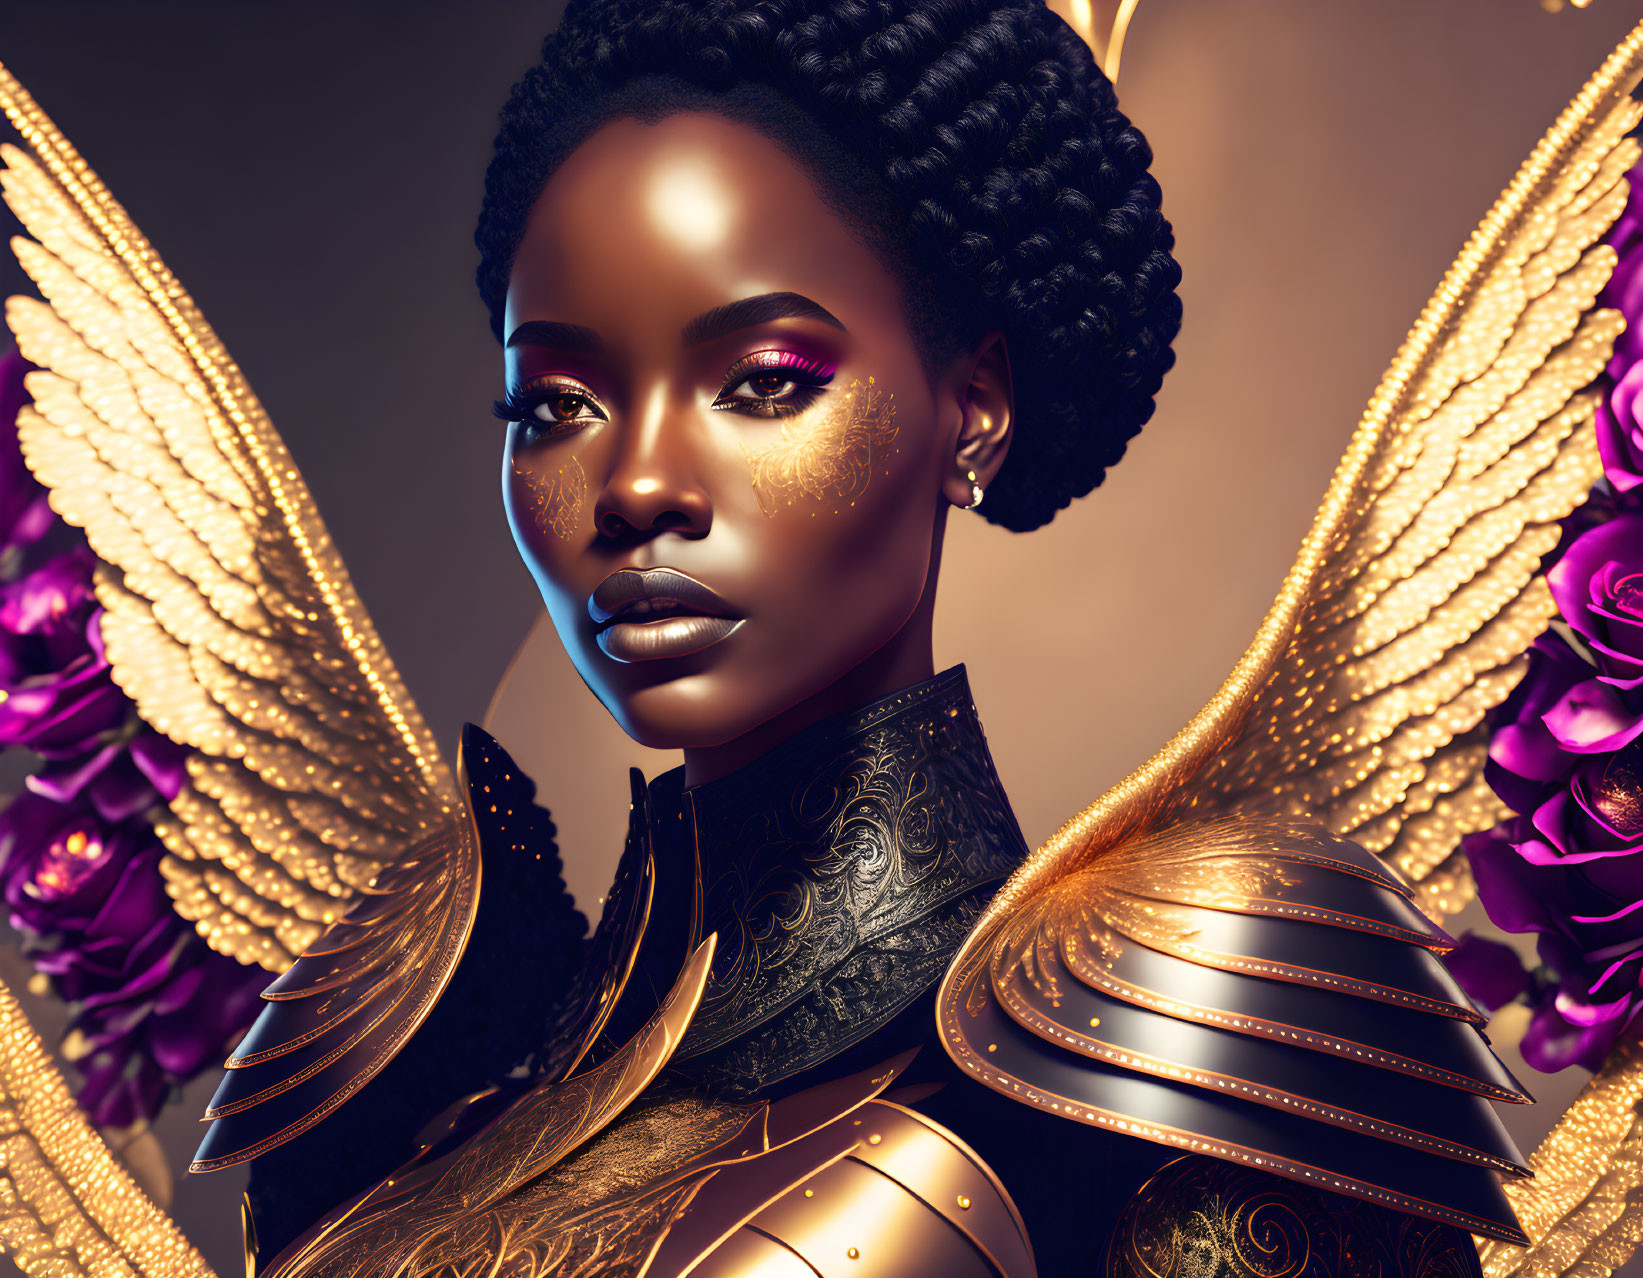 Digital art portrait of woman in golden armor, wings, black and gold makeup, braided hair,